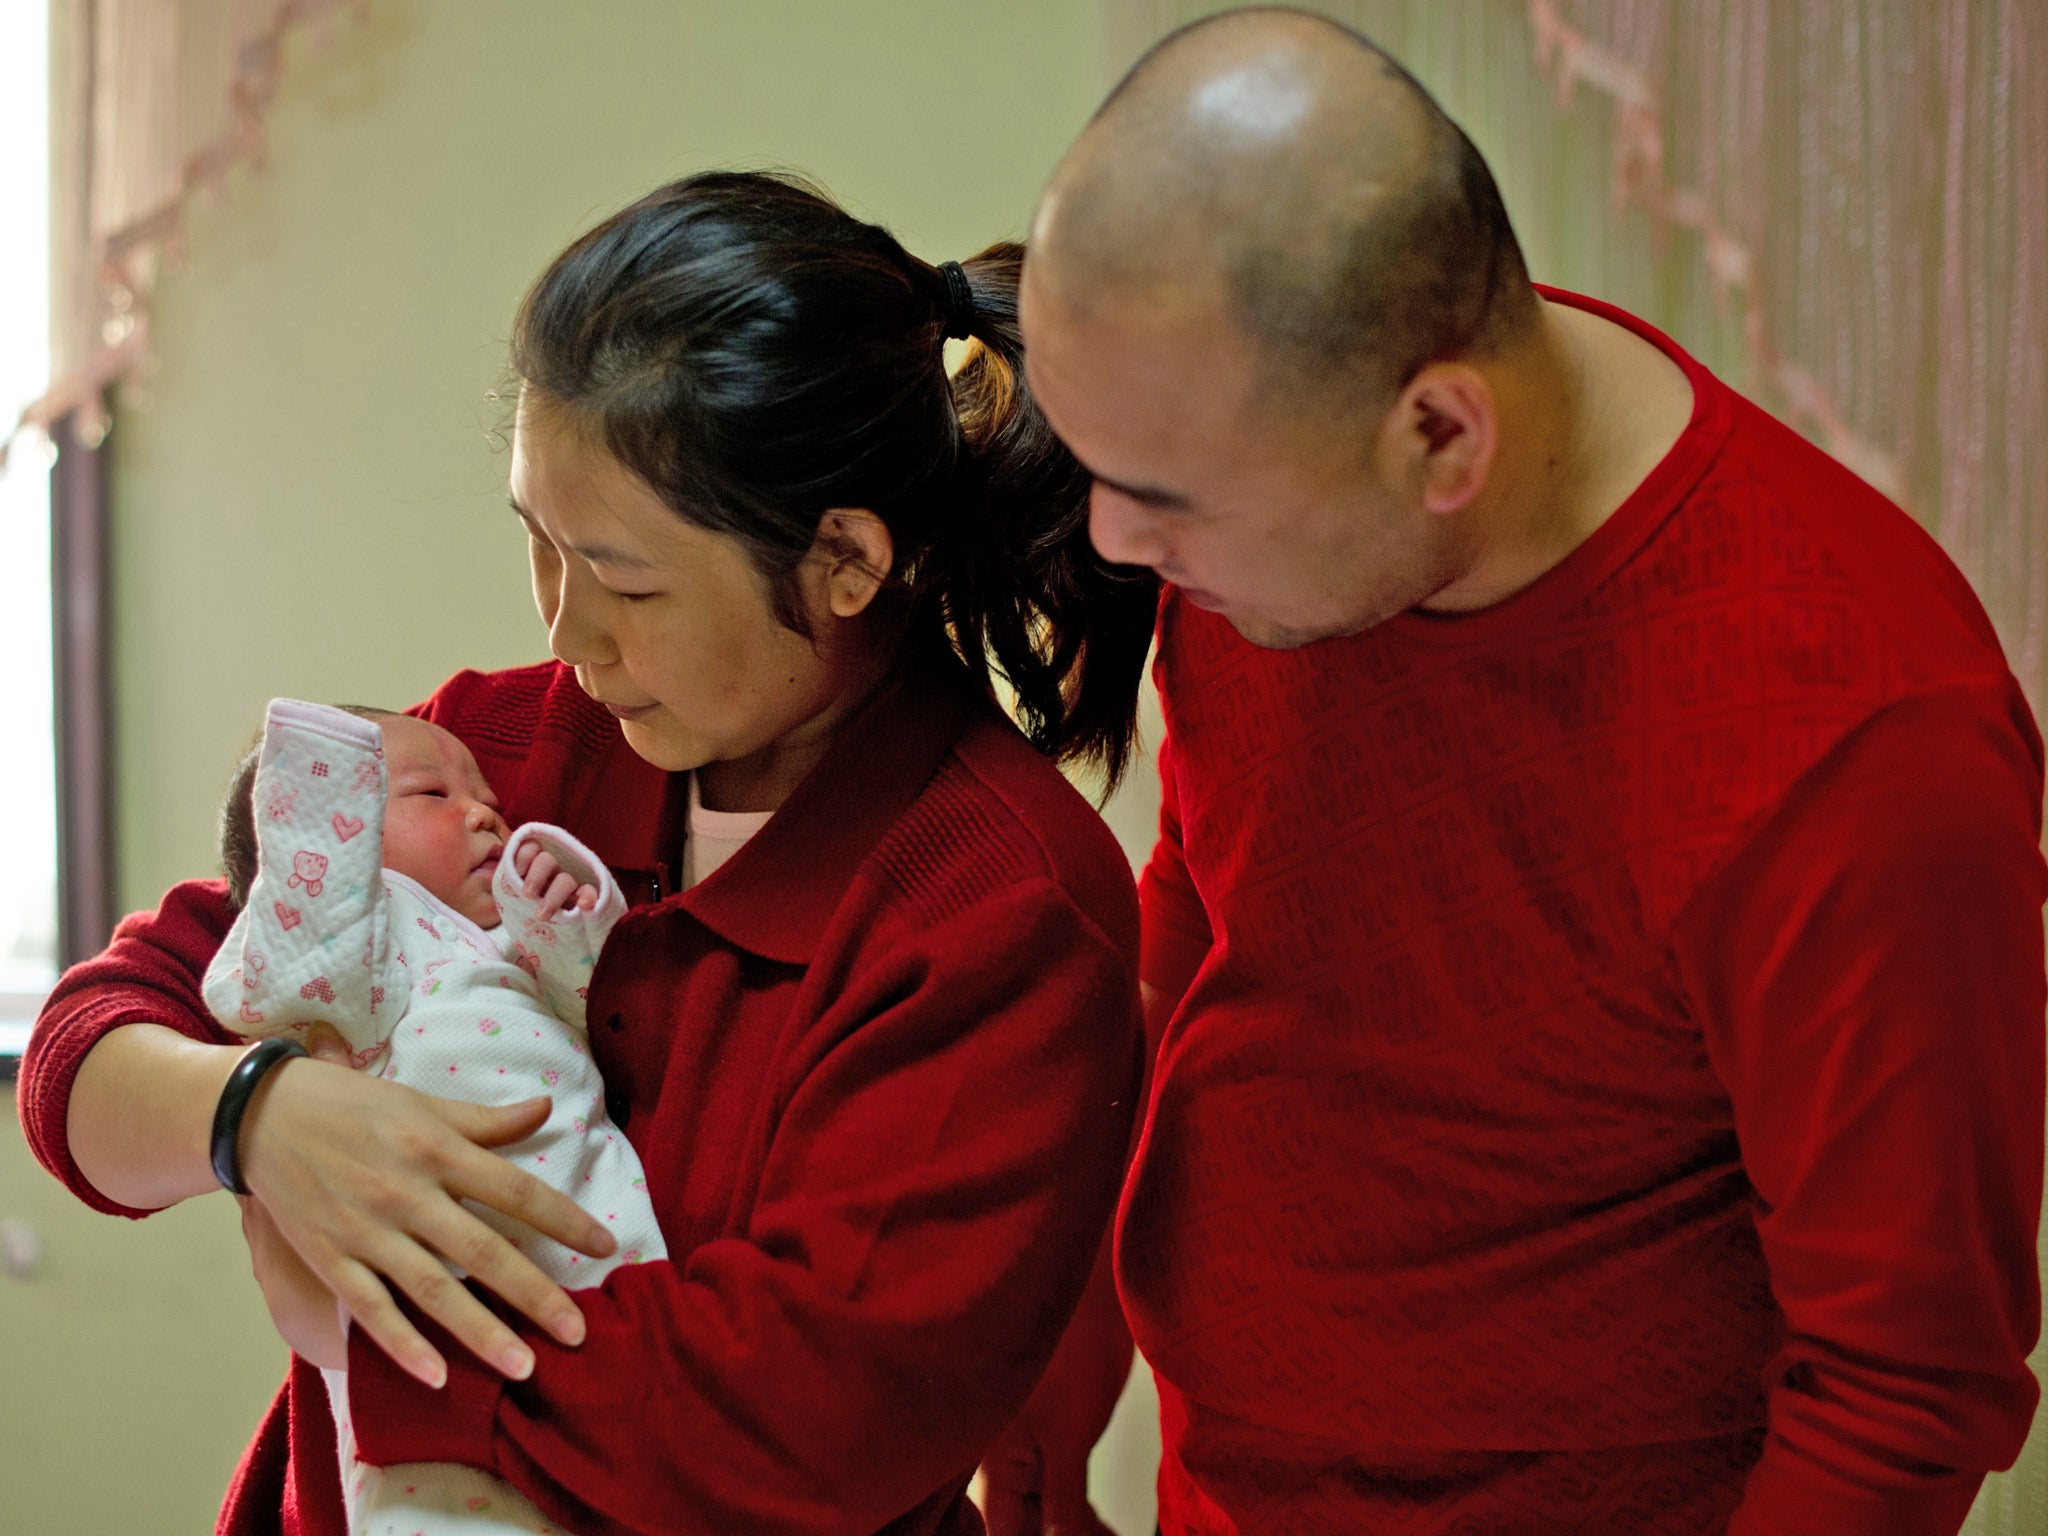 Approximately 400 million births have been prevented by the one-child policy since it was introduced in 1978